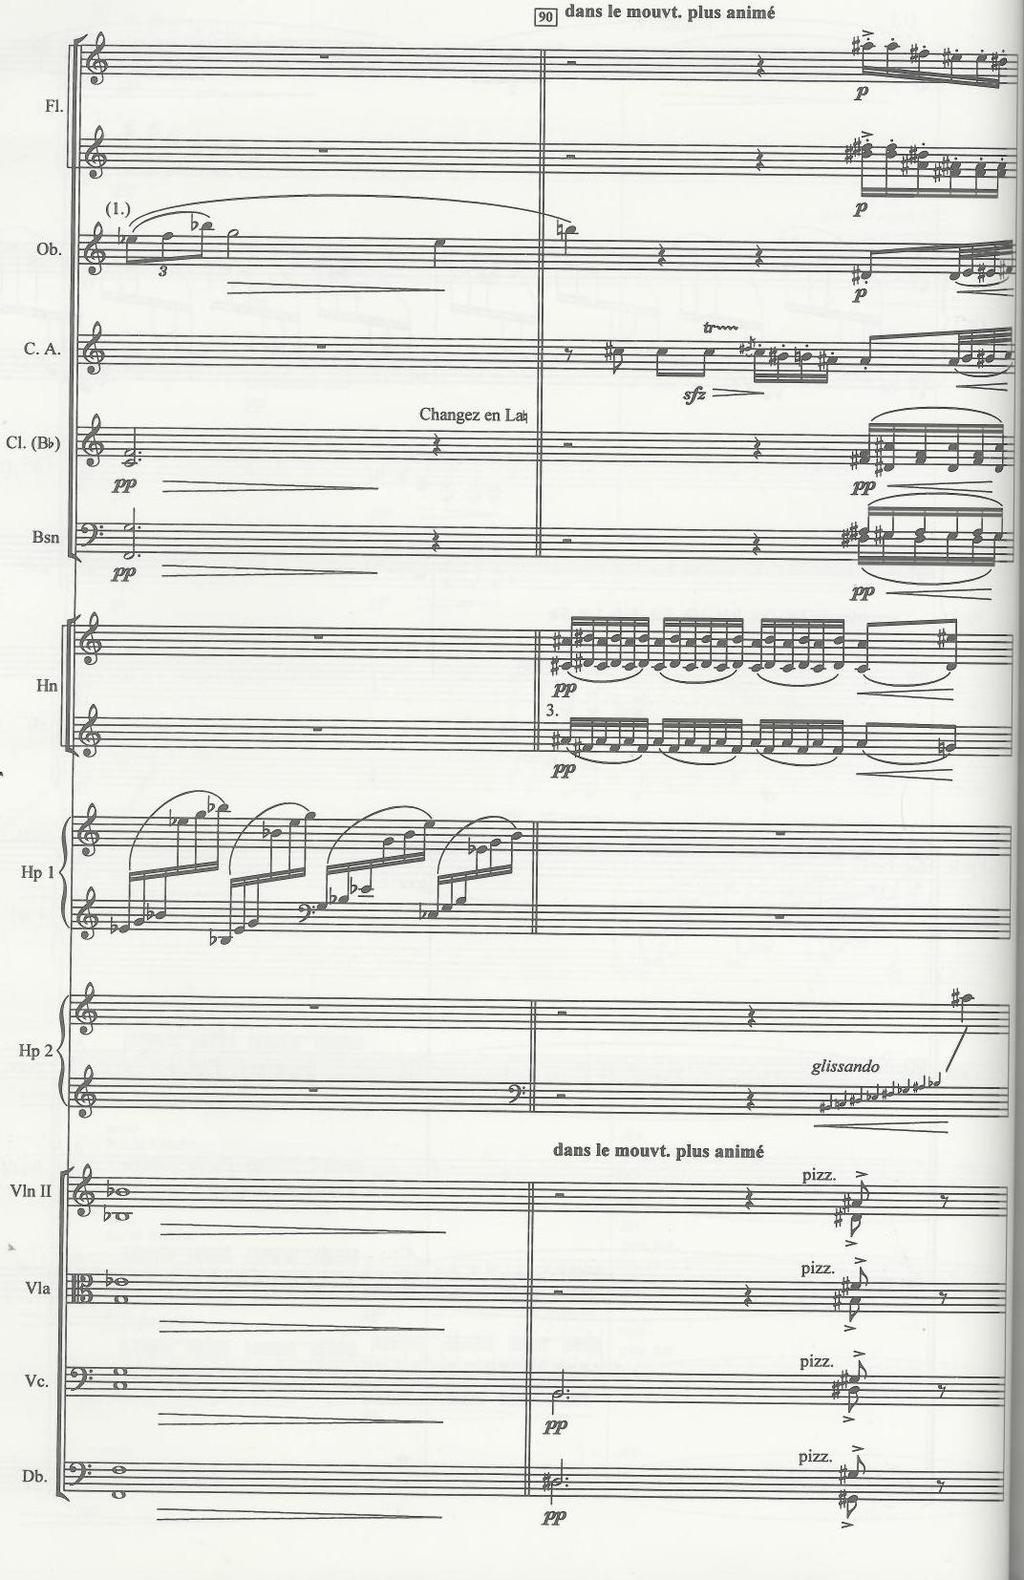 ACTION: look through the rest of this prelude and see if you can